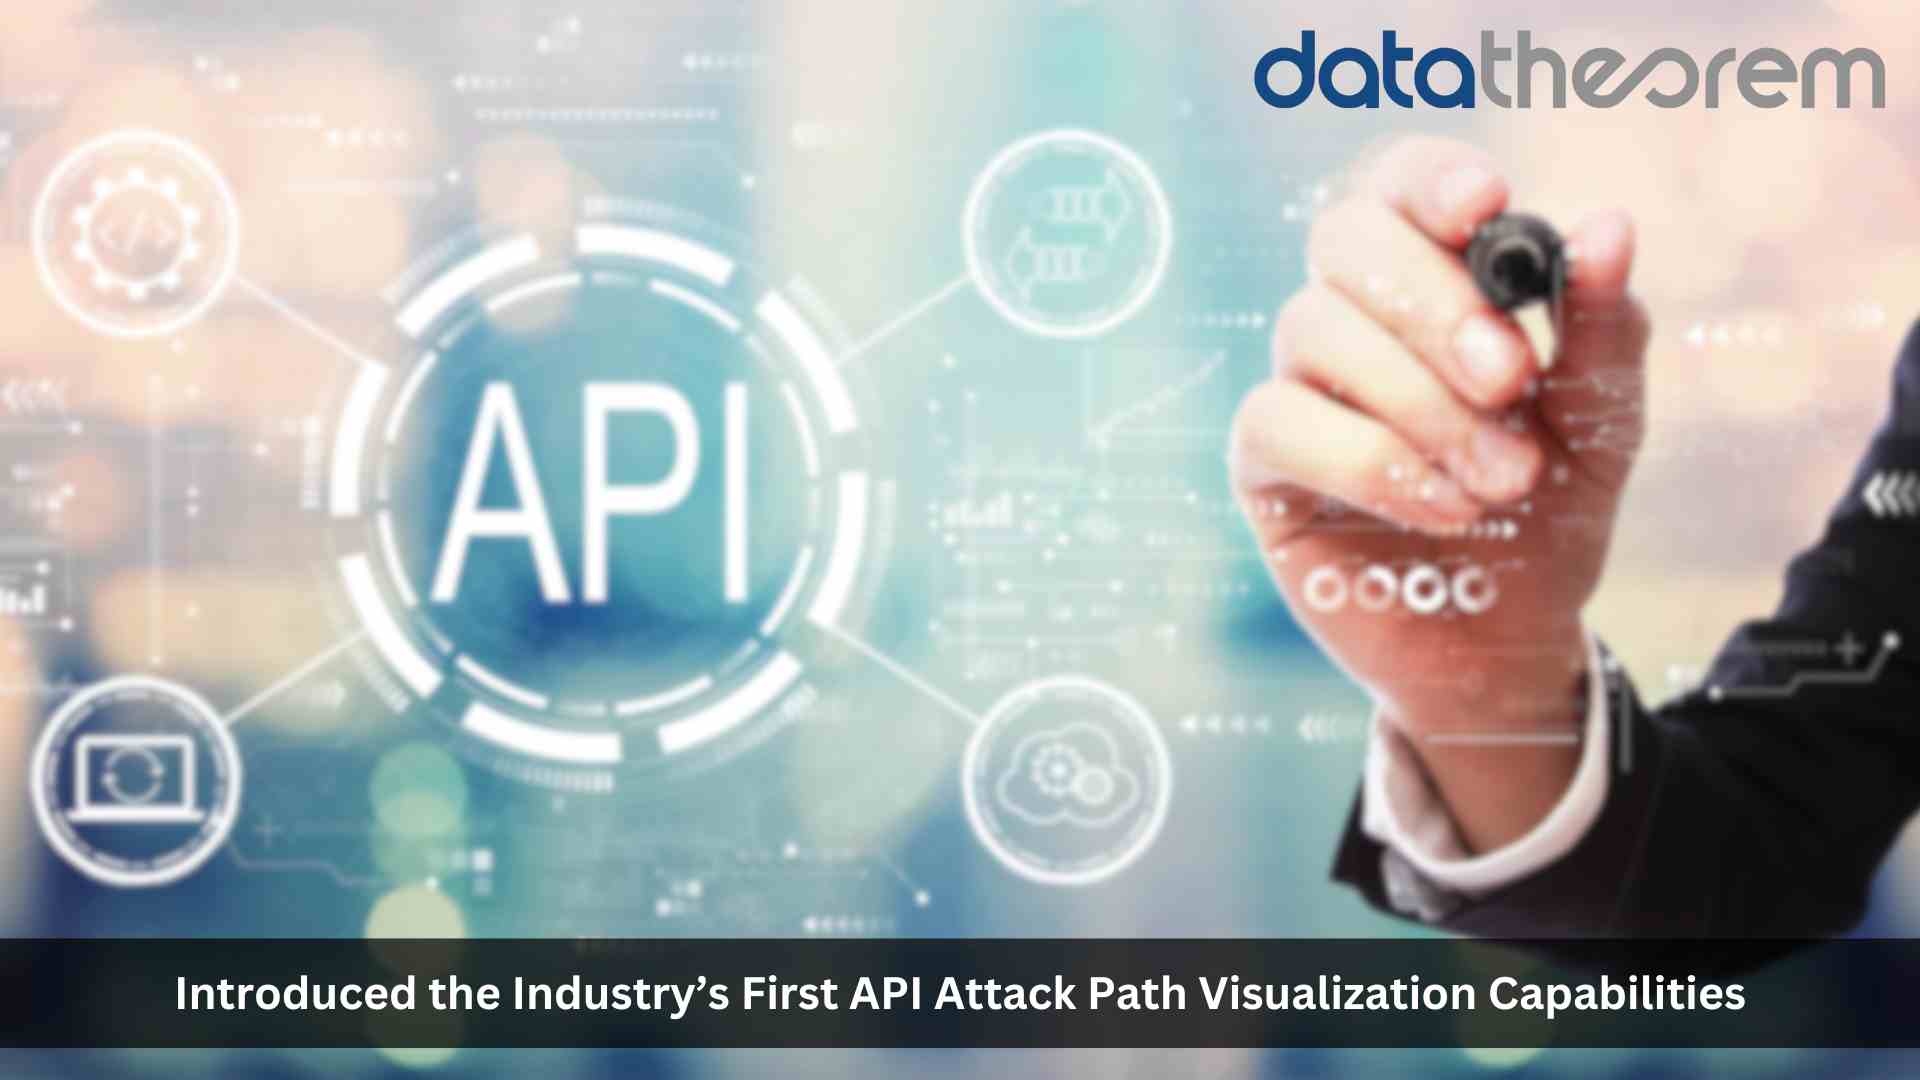 Data Theorem Introduces Industry’s First API Attack Path Visualization Capabilities to Enhance Protection of APIs and Software Supply Chains